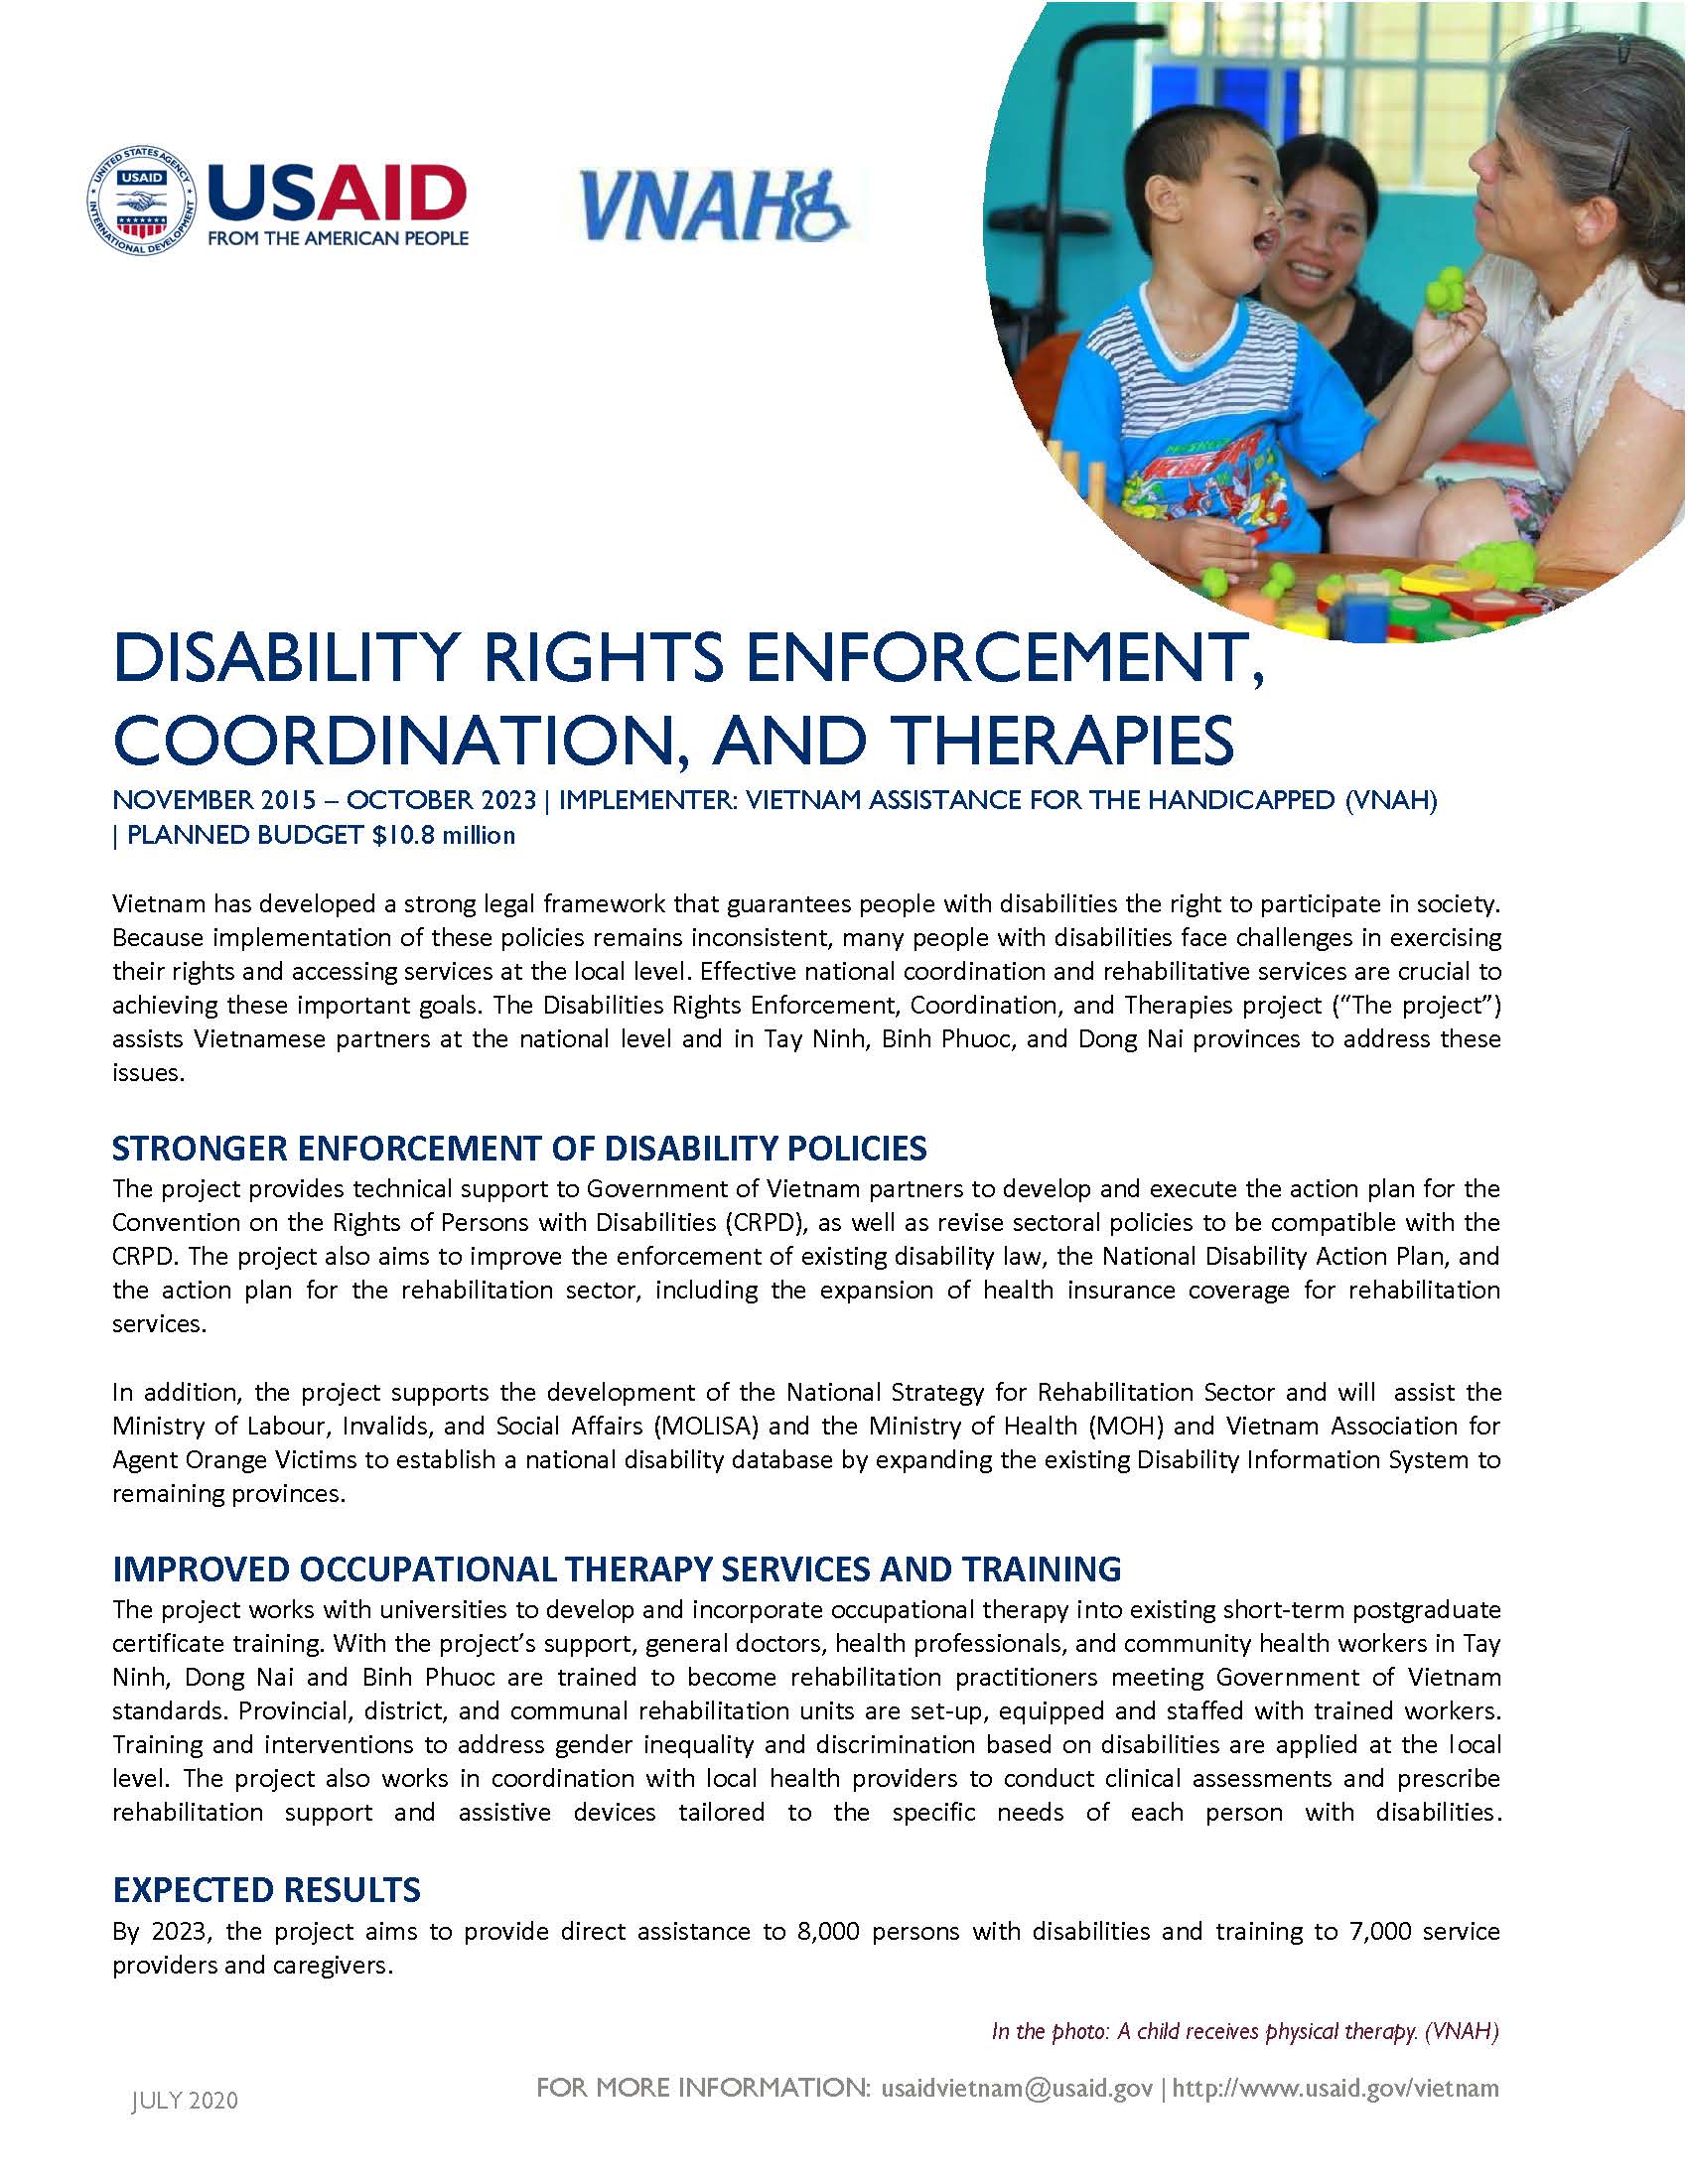 Fact Sheet: Disability Rights Enforcement, Coordination and Therapies